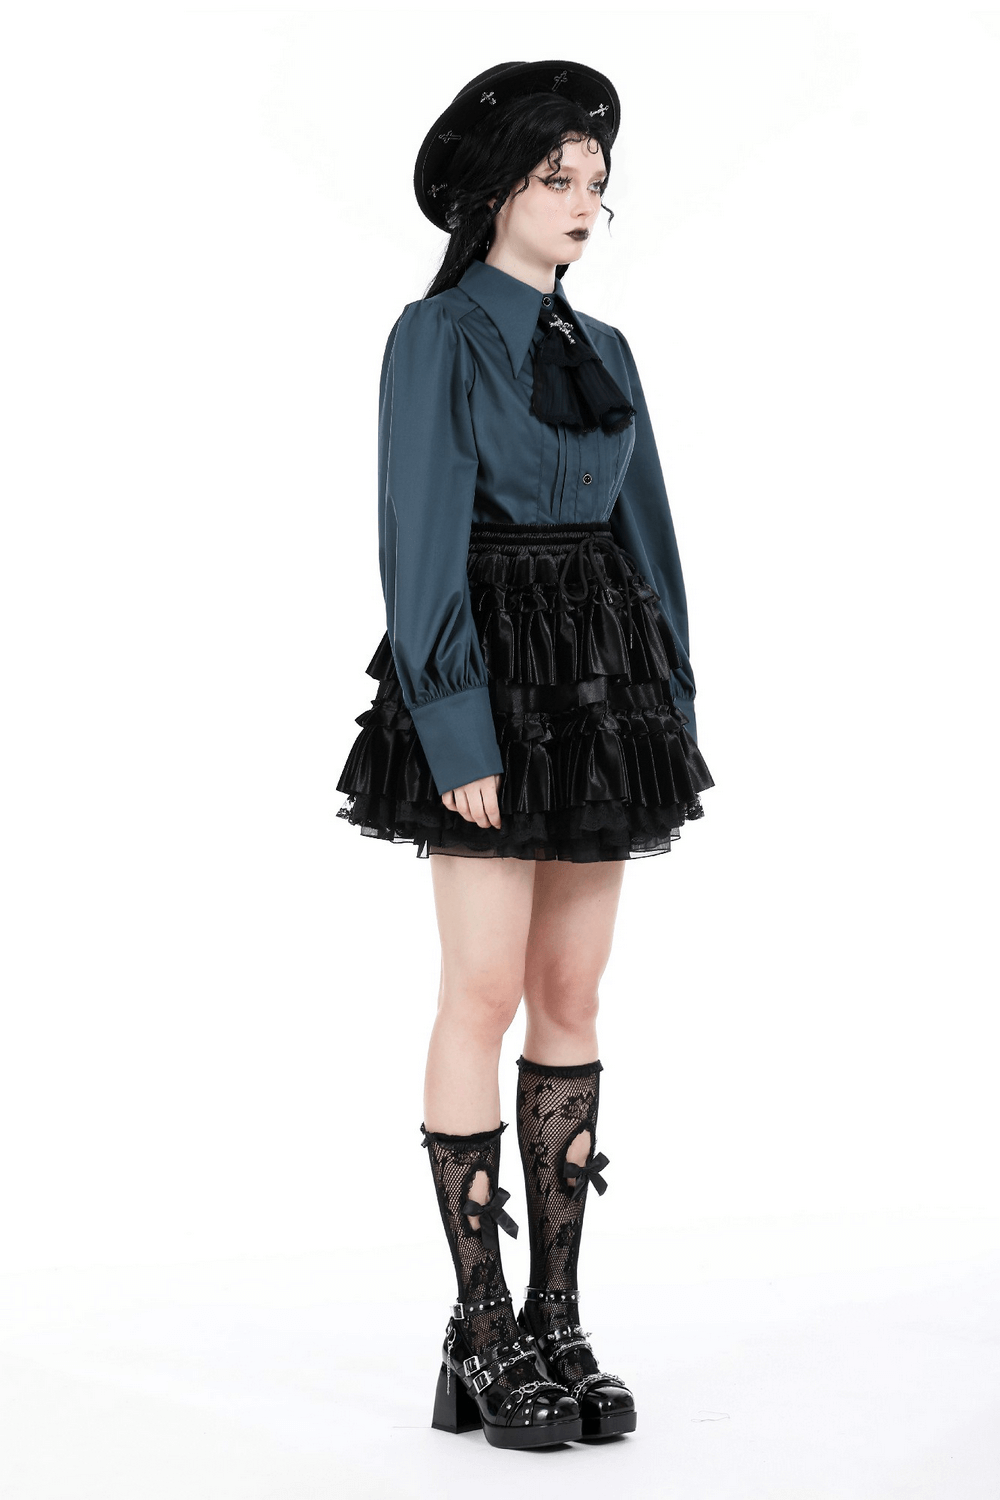 Female Frilly Layered Mini Skirt with Lace Trim